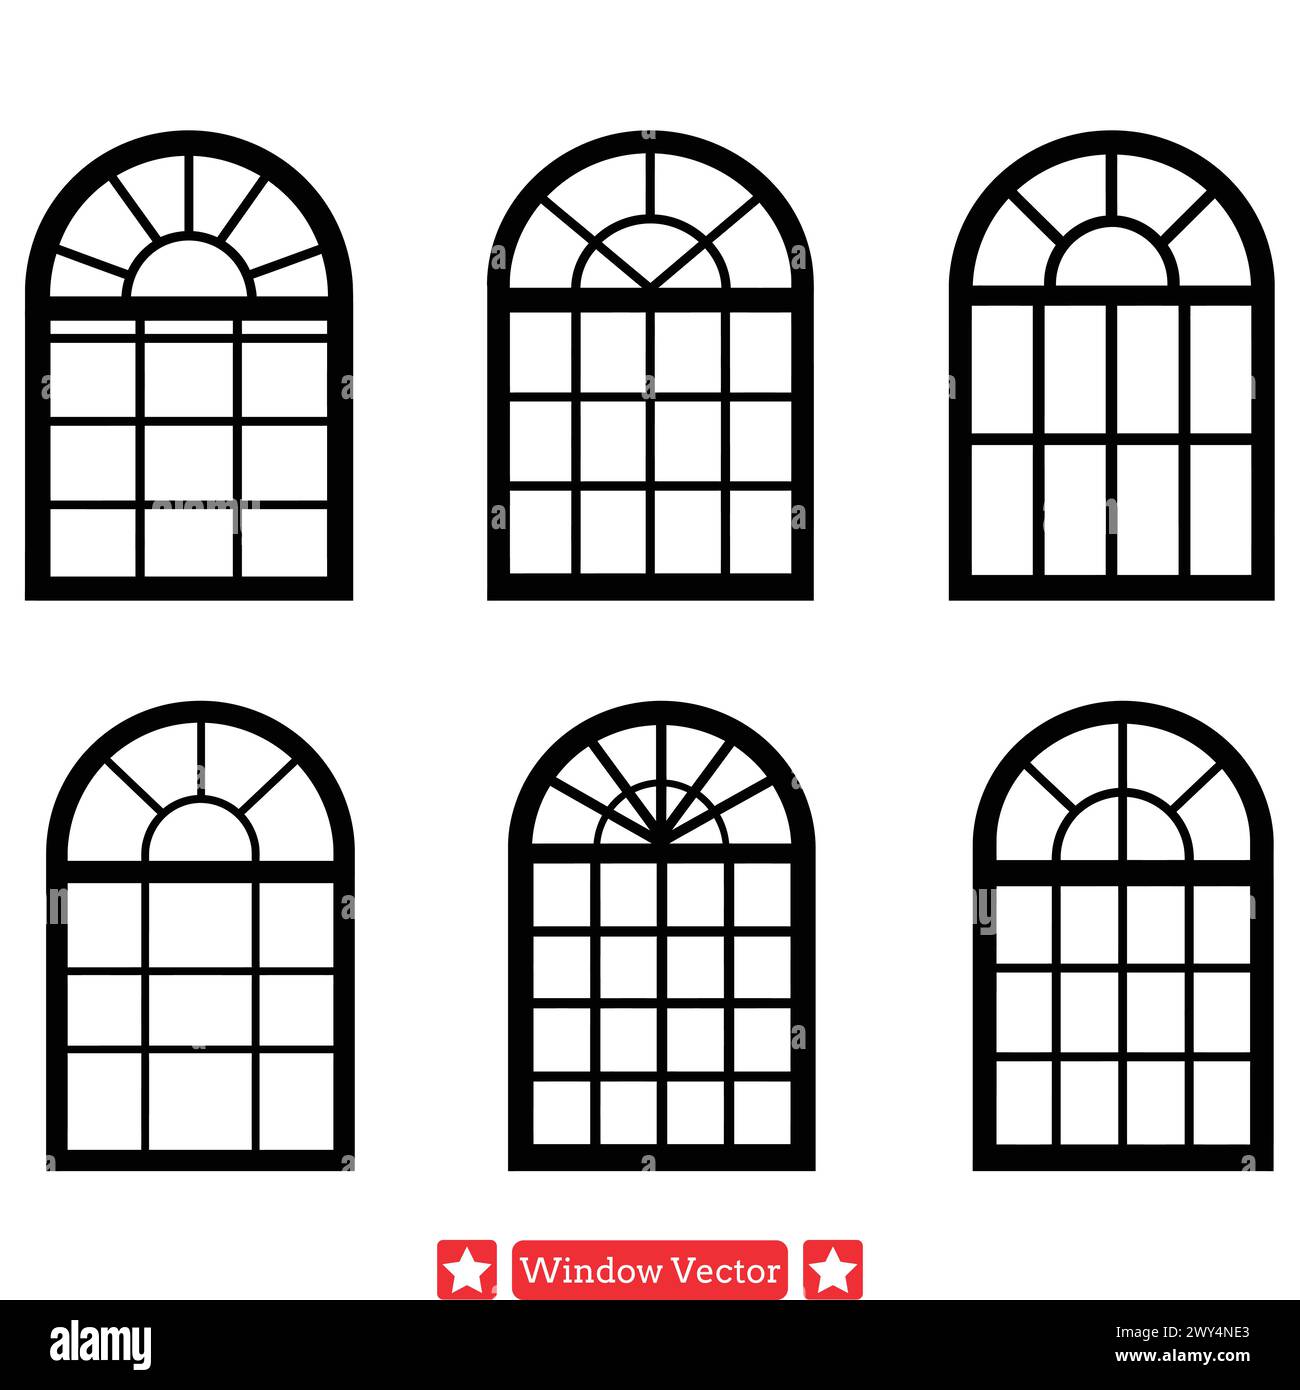 Urban Skylines Unveiled  Window Silhouettes Evoking Cityscape Charm Stock Vector